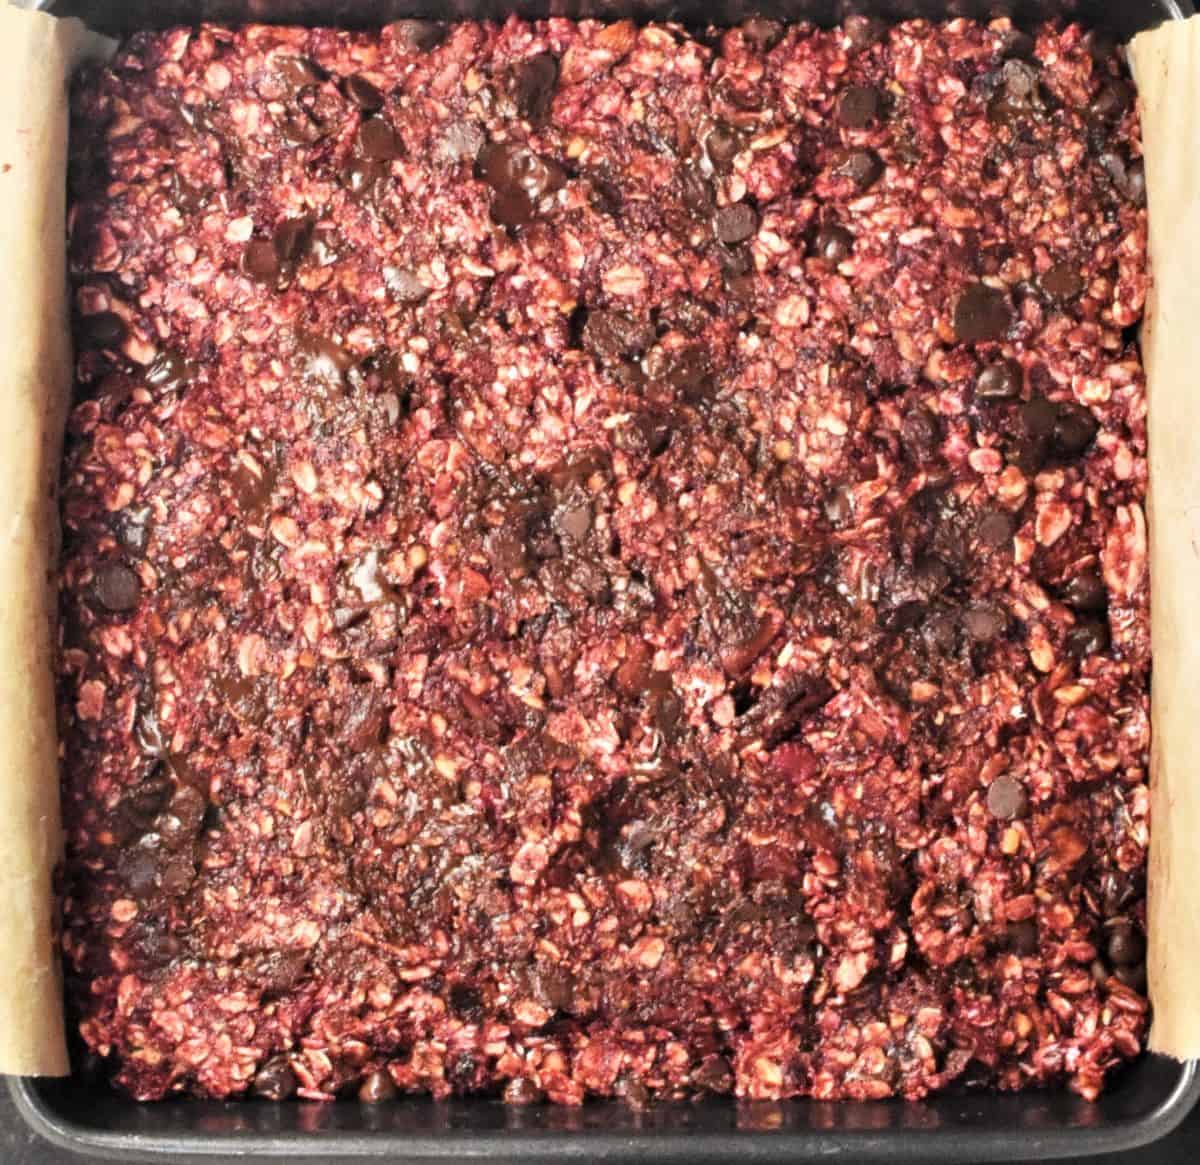 Blackberry bar mixture packed into square pan.